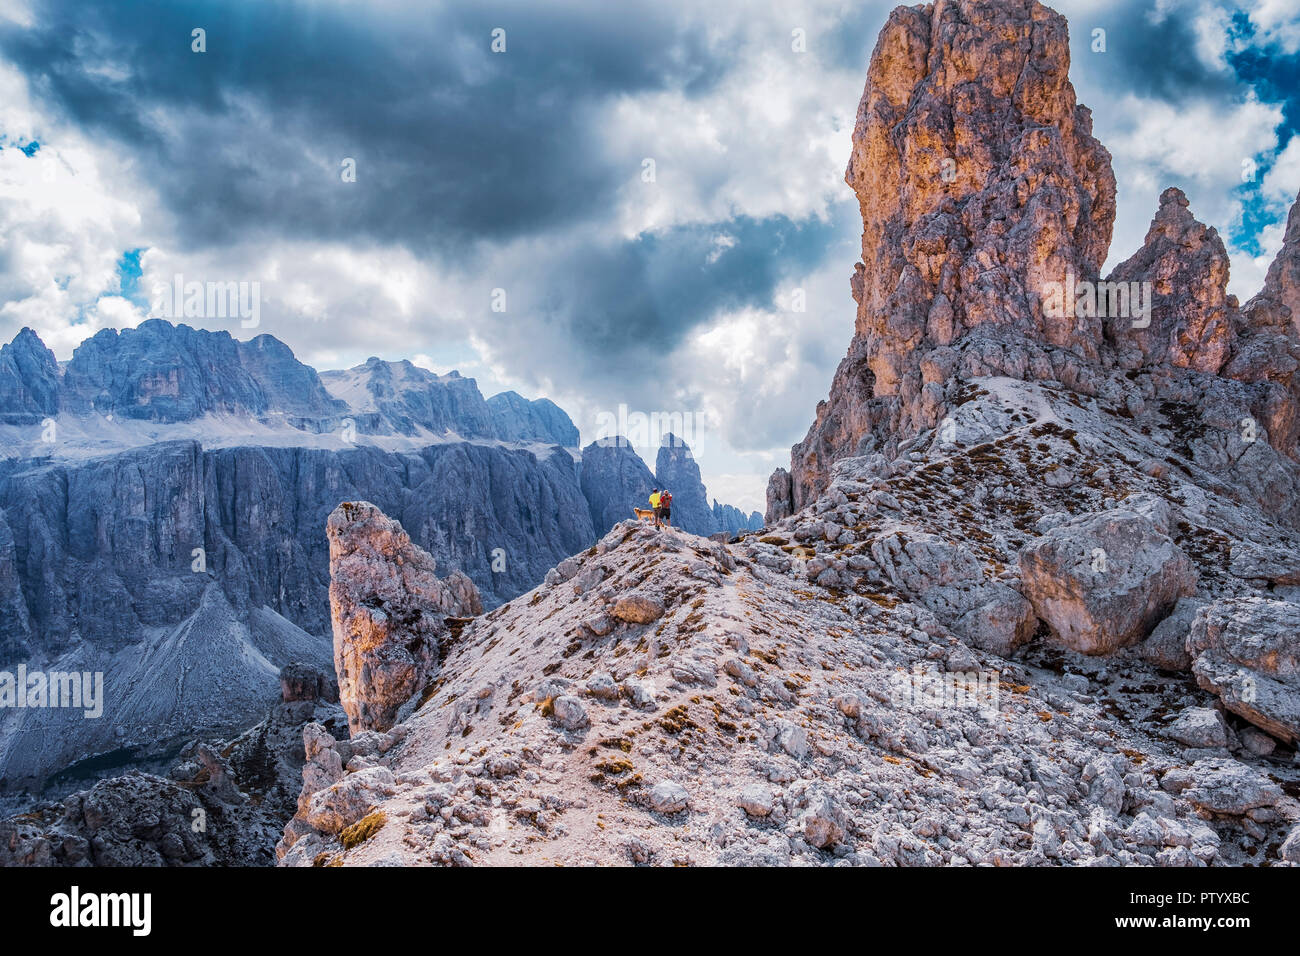 View from Puez-Geisler reserve in the Dolomite alps. Hiker with dogs standing on the rim, viewing the mountains. Stock Photo